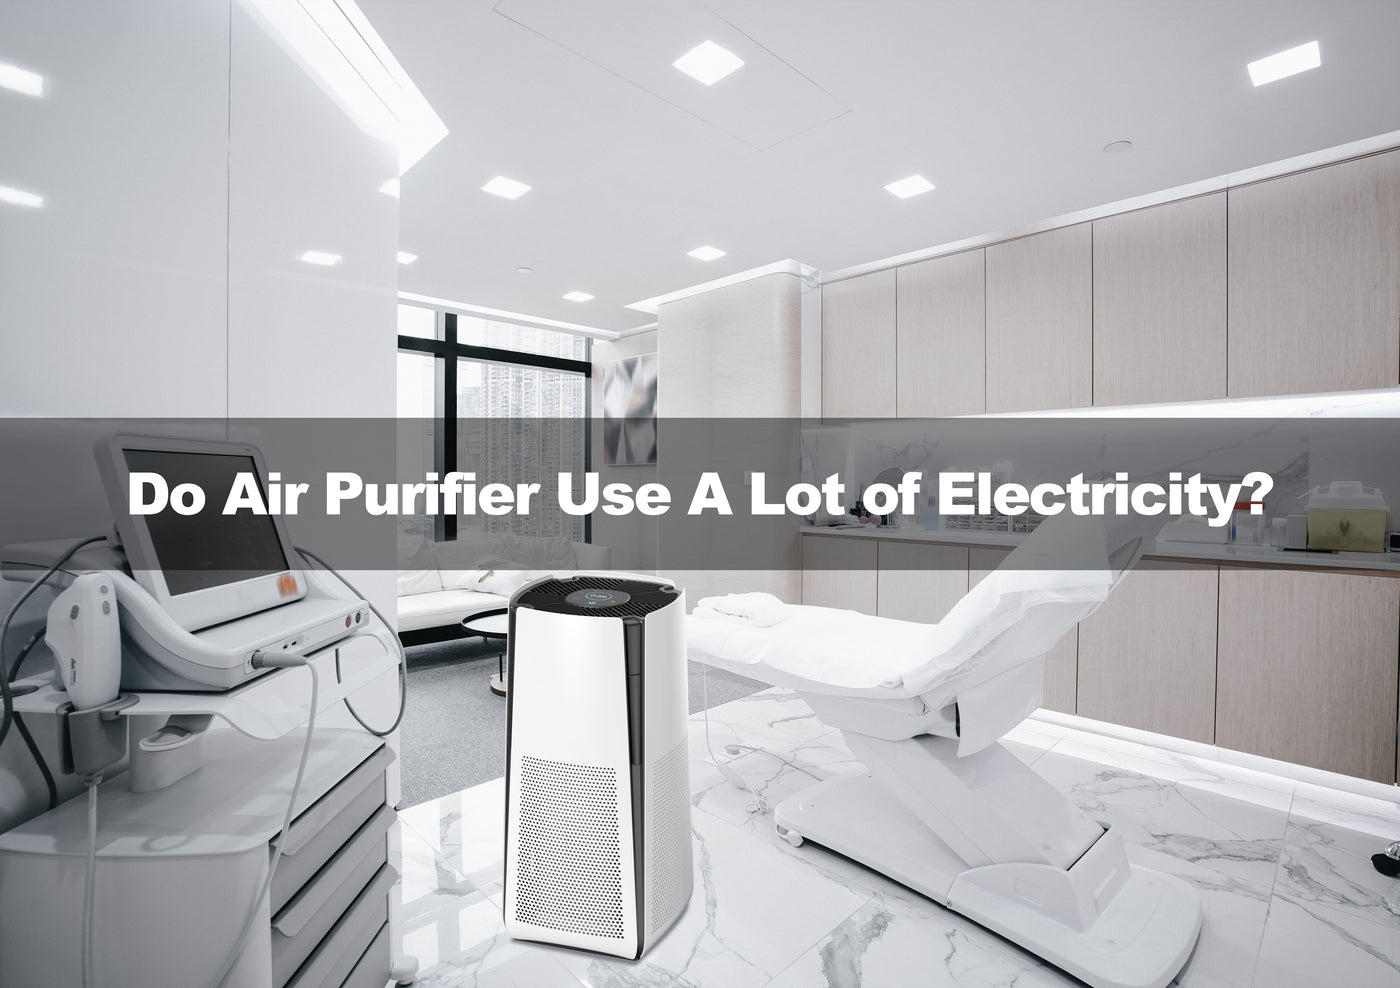 How Much Electricity Does an Air Purifier Use